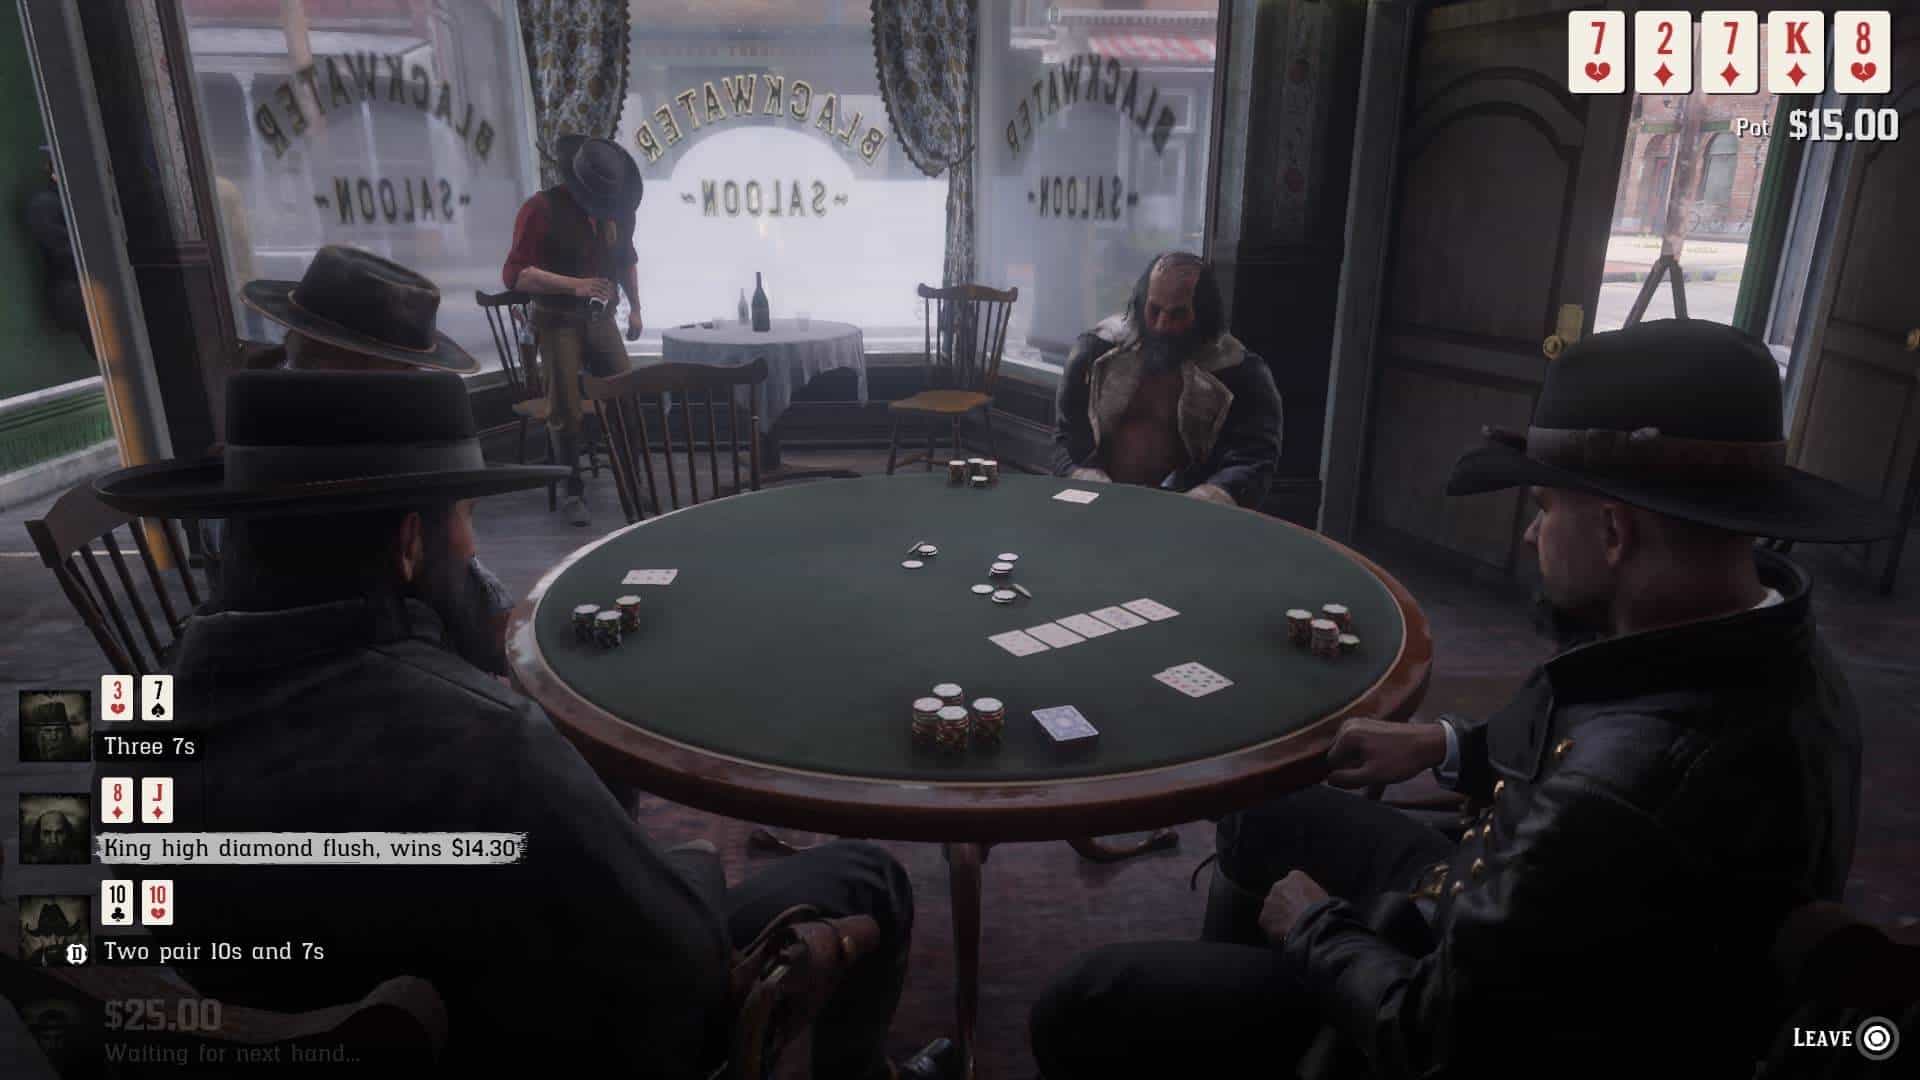 Can You Play Poker in Rdr2 Online?